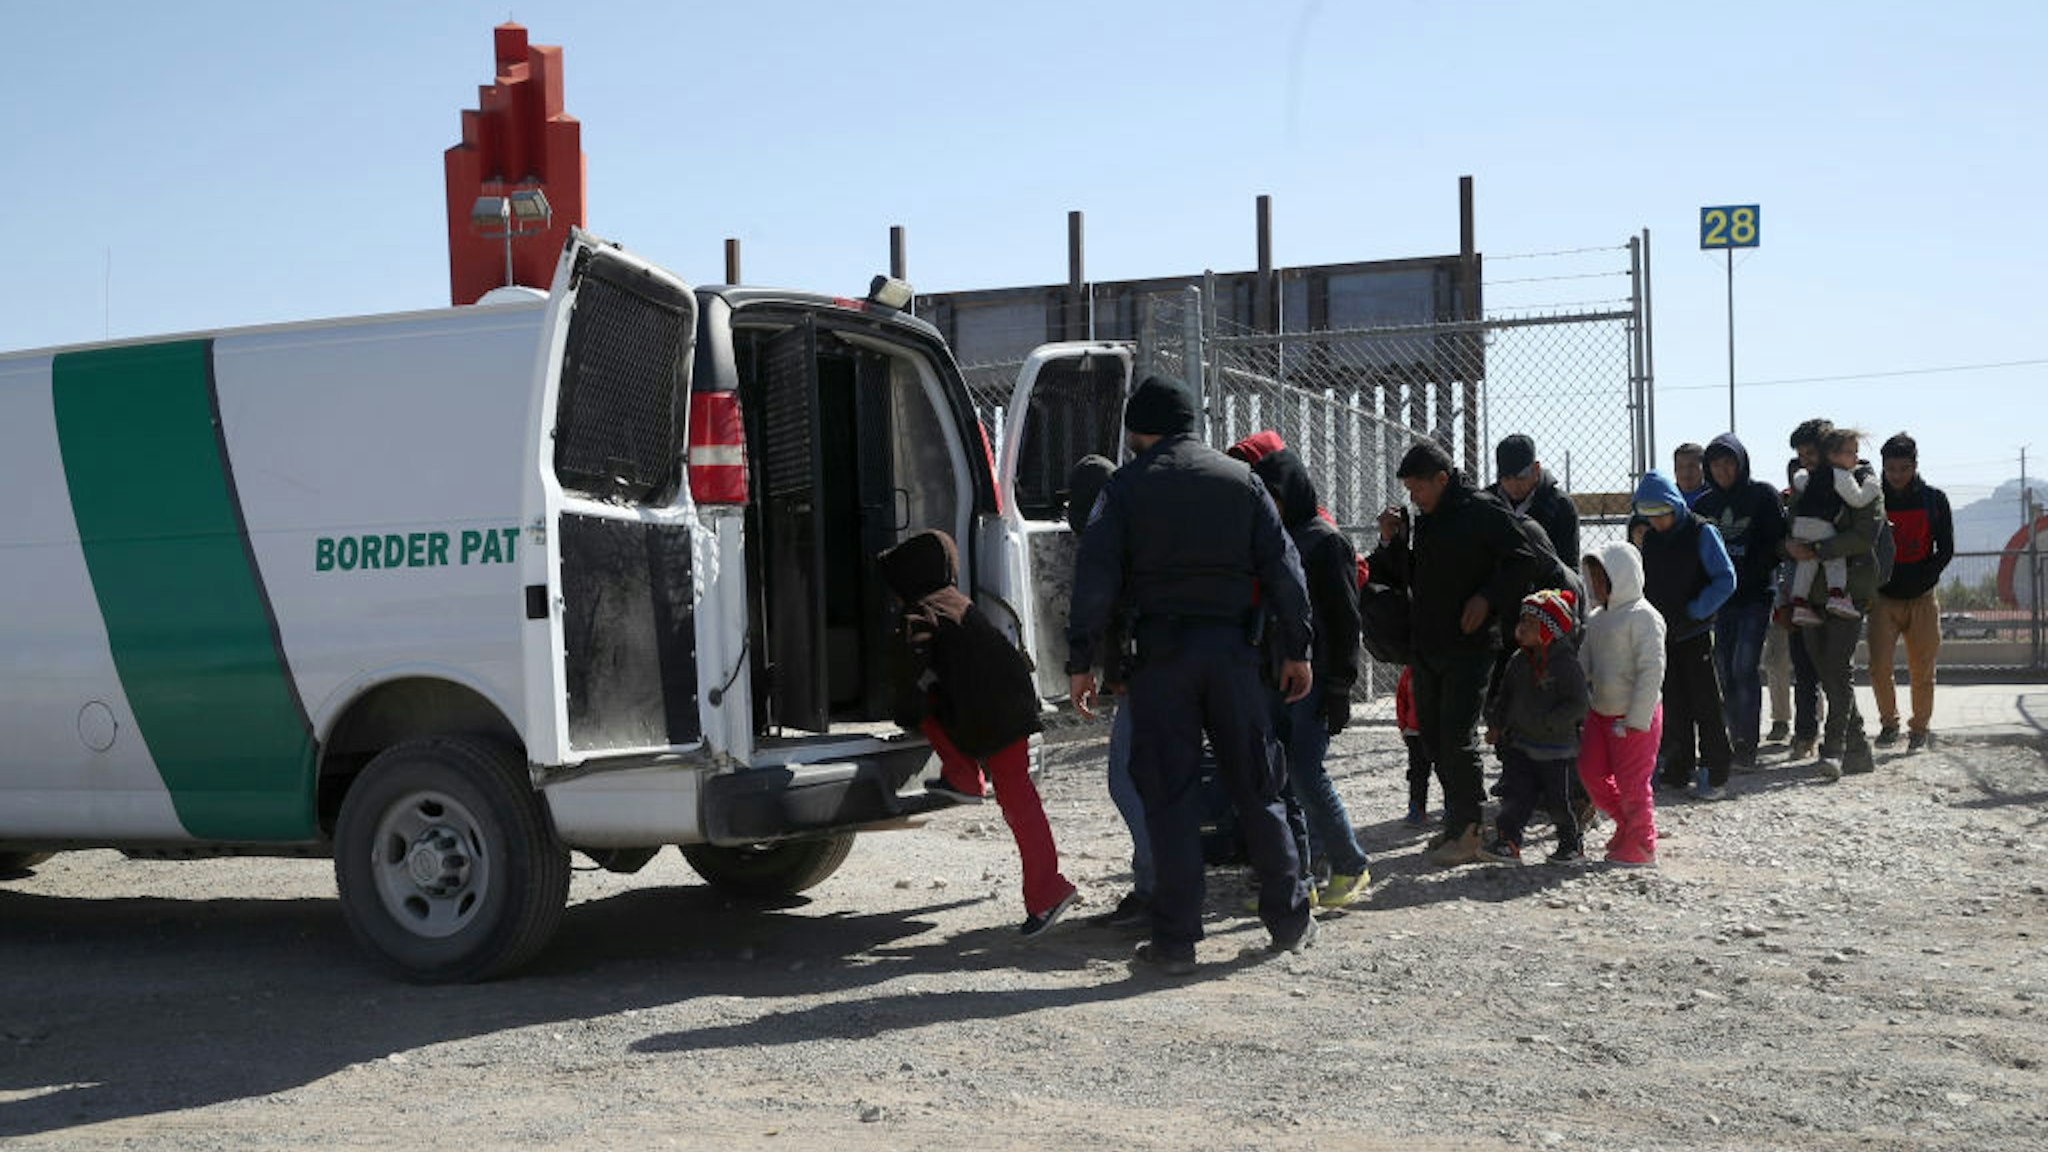 EL PASO, - MARCH 31: A U.S. Border Patrol agent loads detained migrants into a van at the border of the United States and Mexico on March 31, 2019 in El Paso, Texas. U.S. President Donald Trump has threatened to close the United States border if Mexico does not stem the flow of illegal migrants trying to cross.